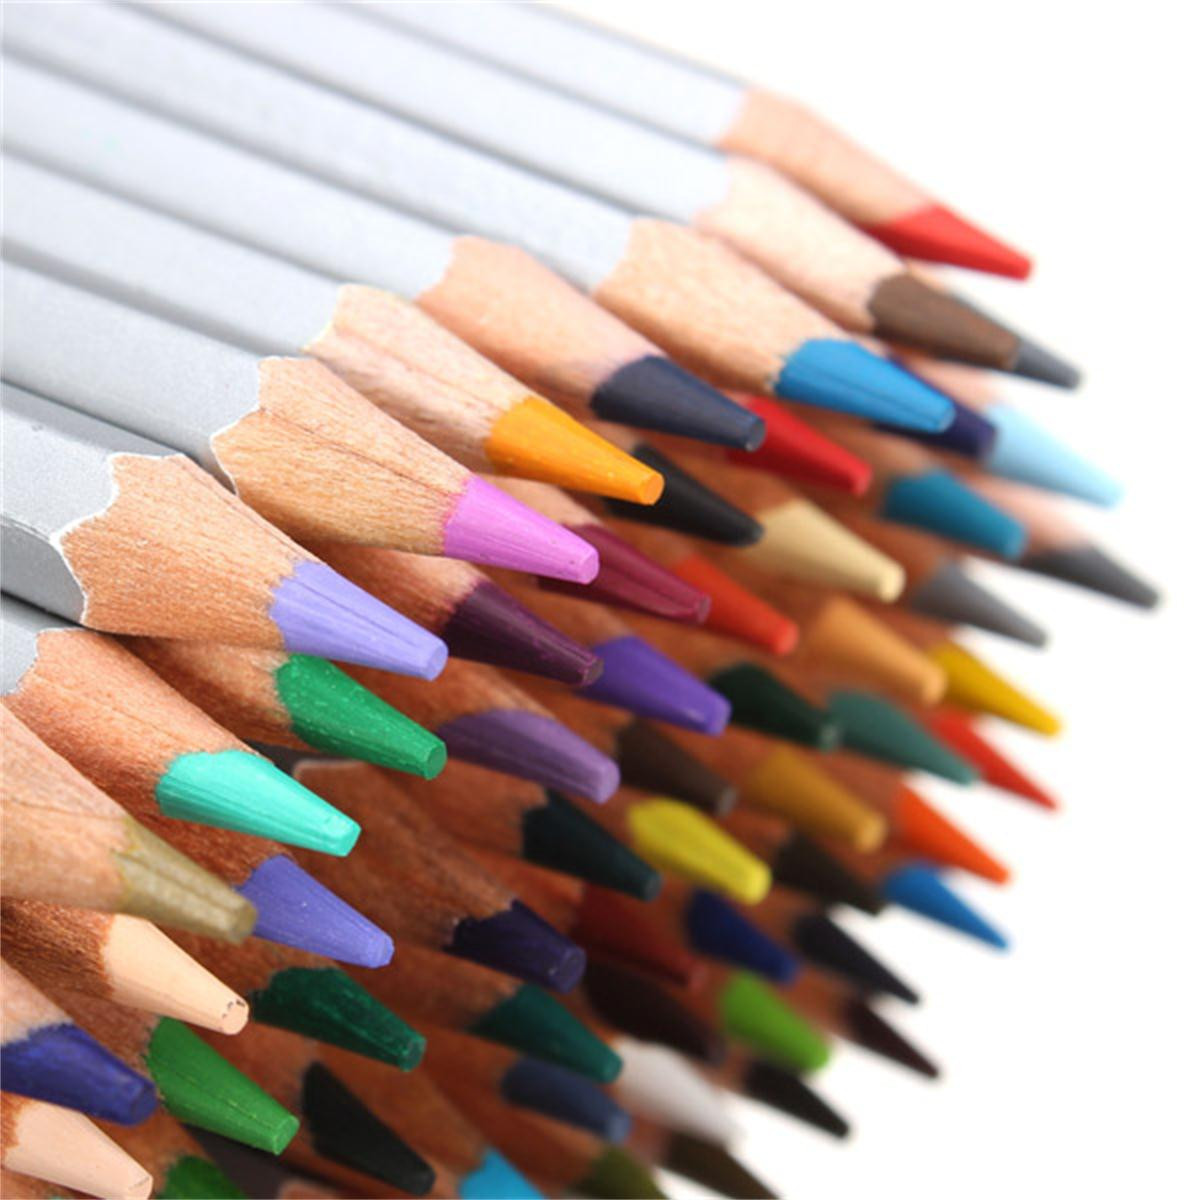 72-Colors-Art-Drawing-Pencil-Set-Oil-Non-toxic-Pencils-Painting-Sketching-Drawing-Stationery-School--973251-12